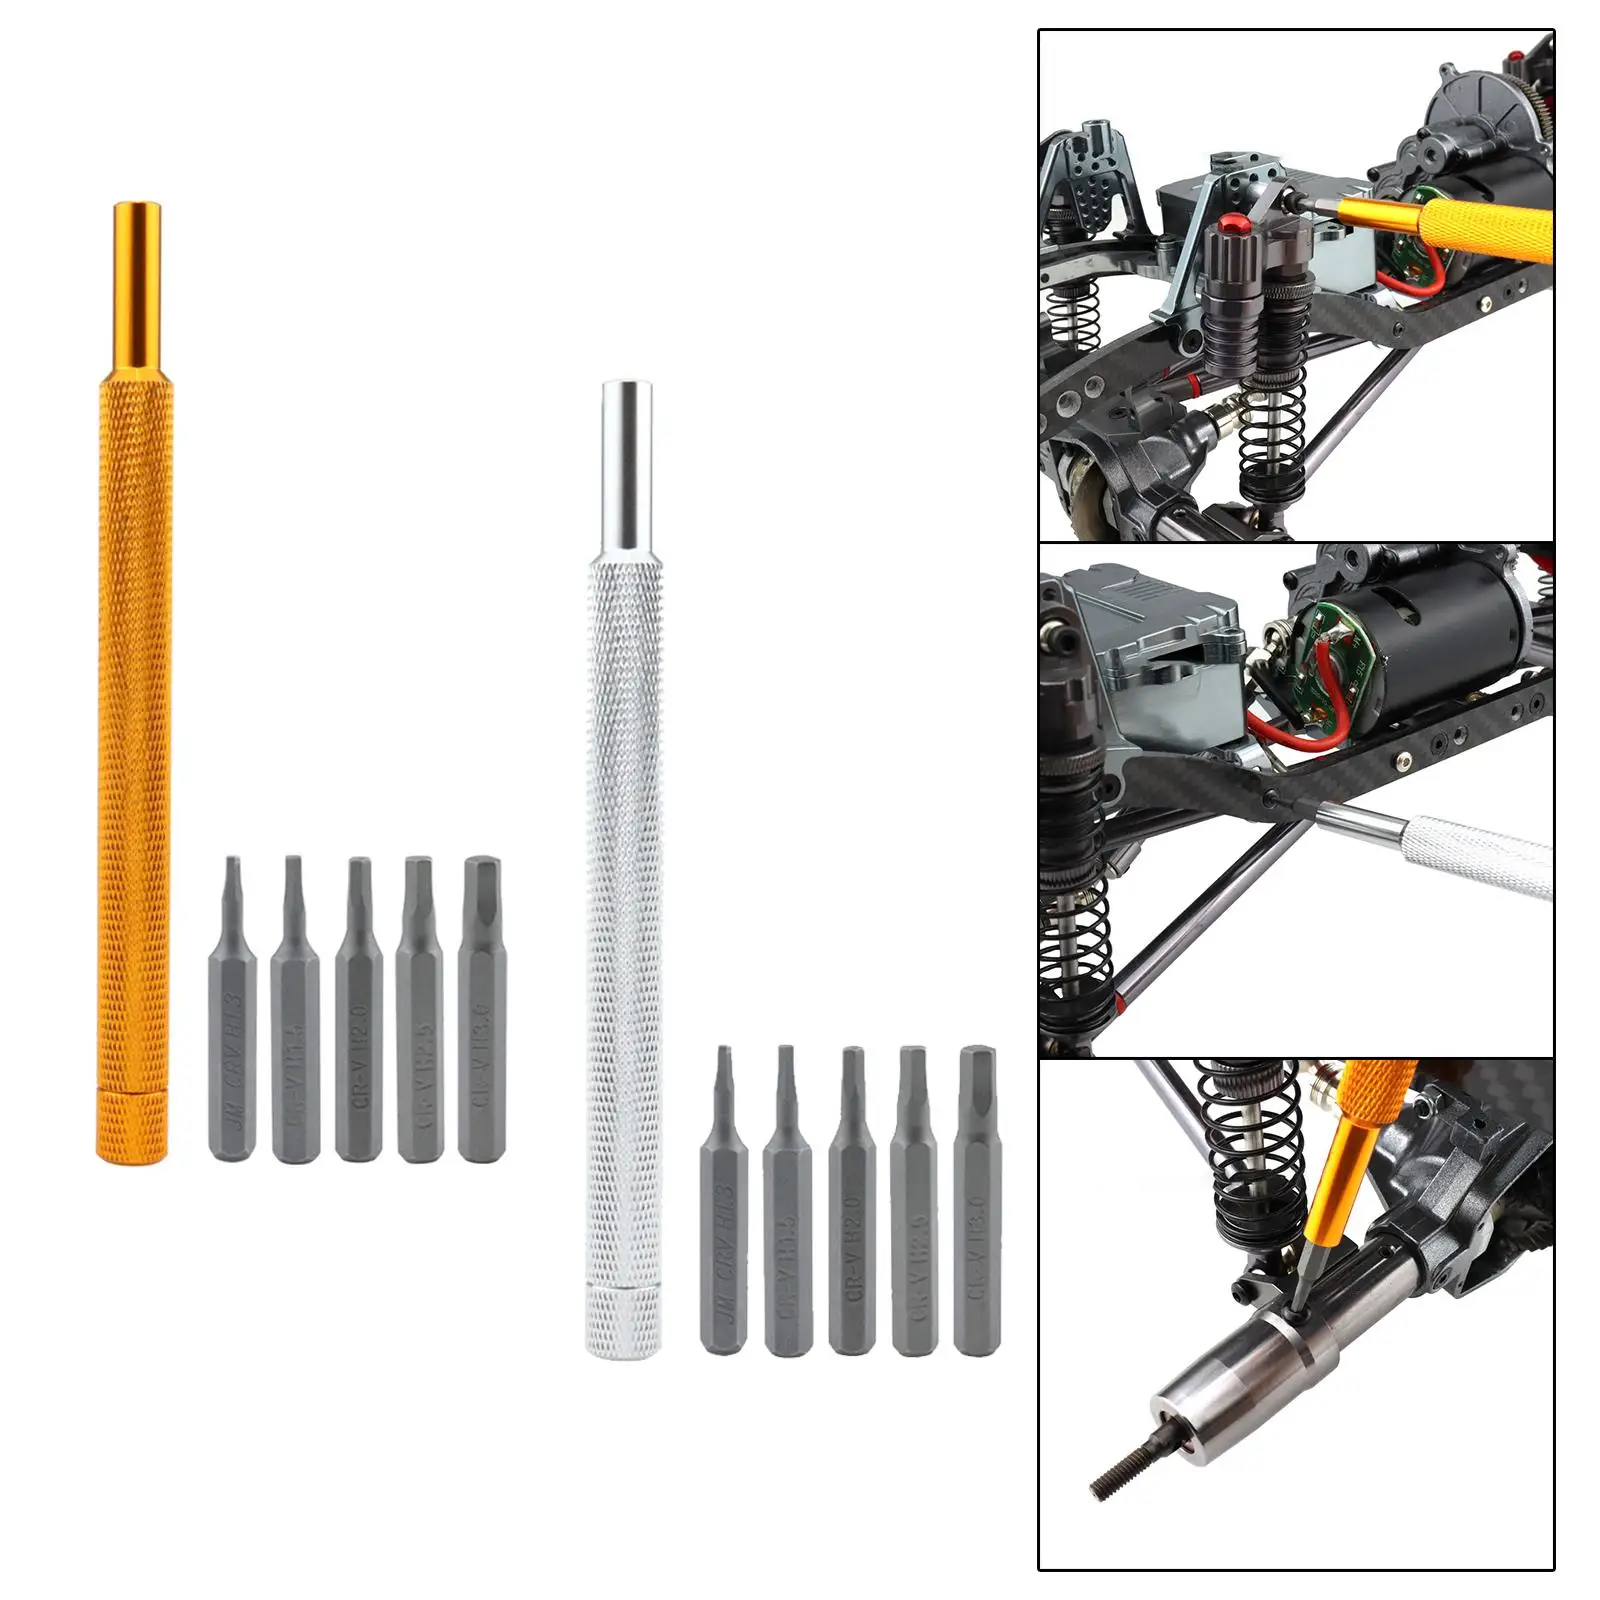 6Pcs Metal Screw Driver Tools Kit Set with 1.3mm 1.5mm 2.0mm 2.5mm 3.0mm Bits for RC Boat Airplane Truck DIY Accessories Parts